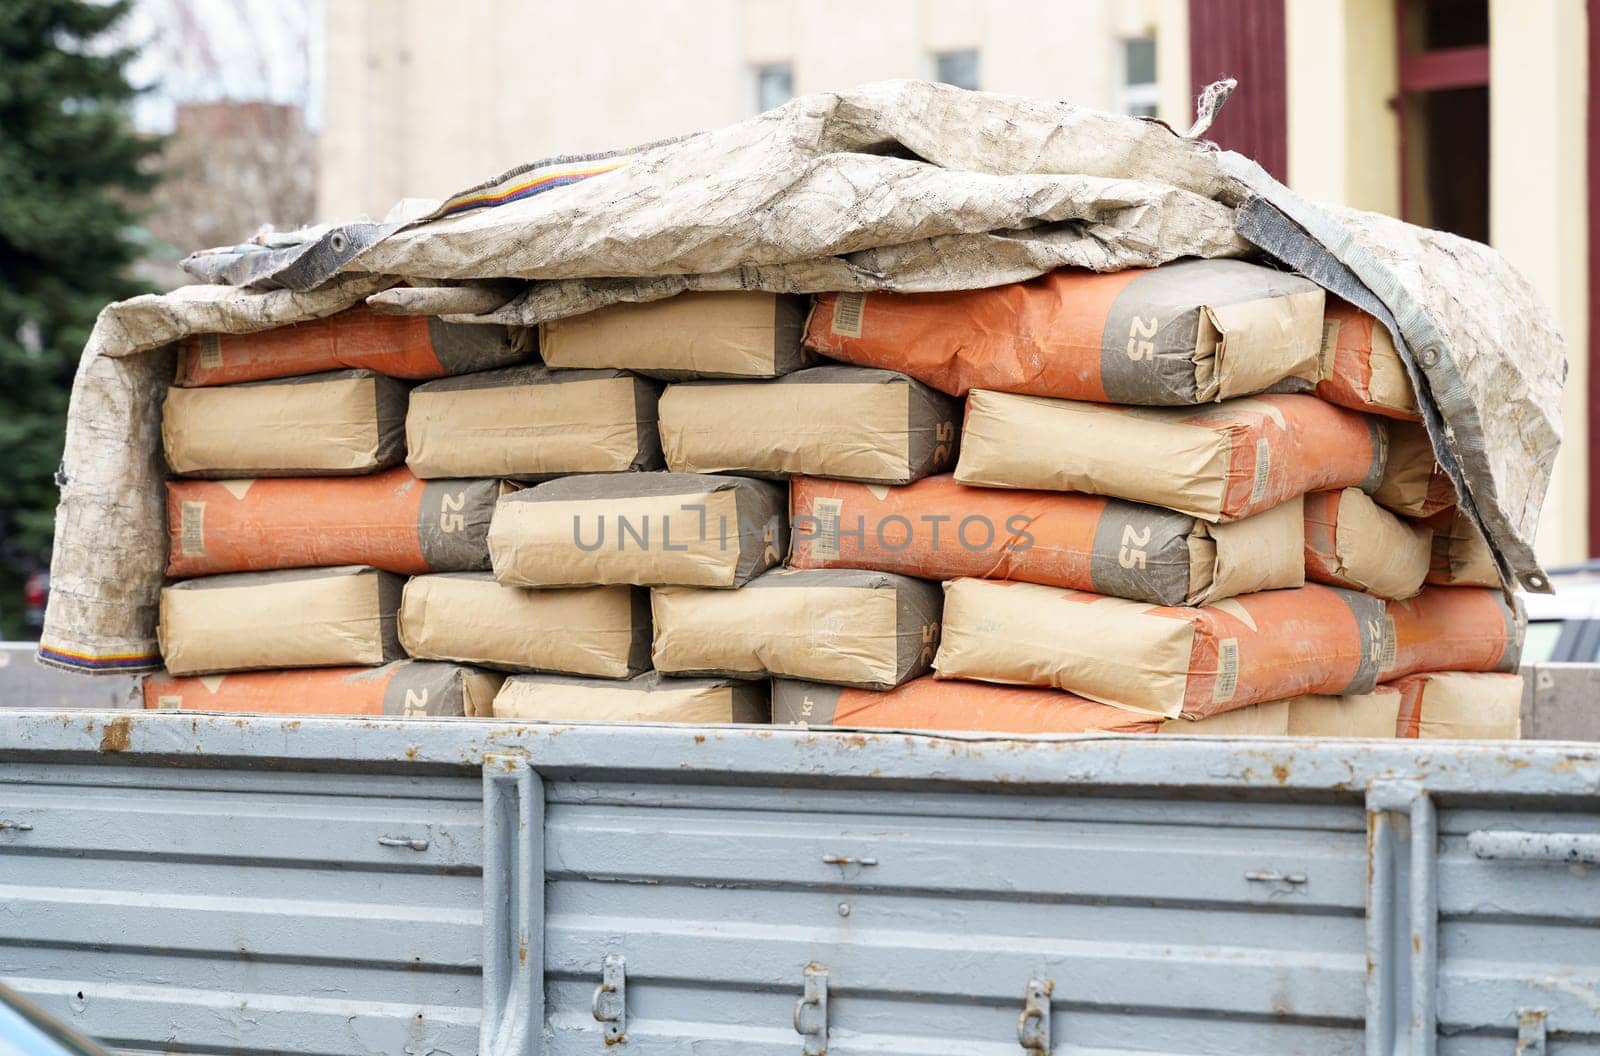 A pickup truck bed is filled with stacked cement bags, indicating ongoing construction work at a site.